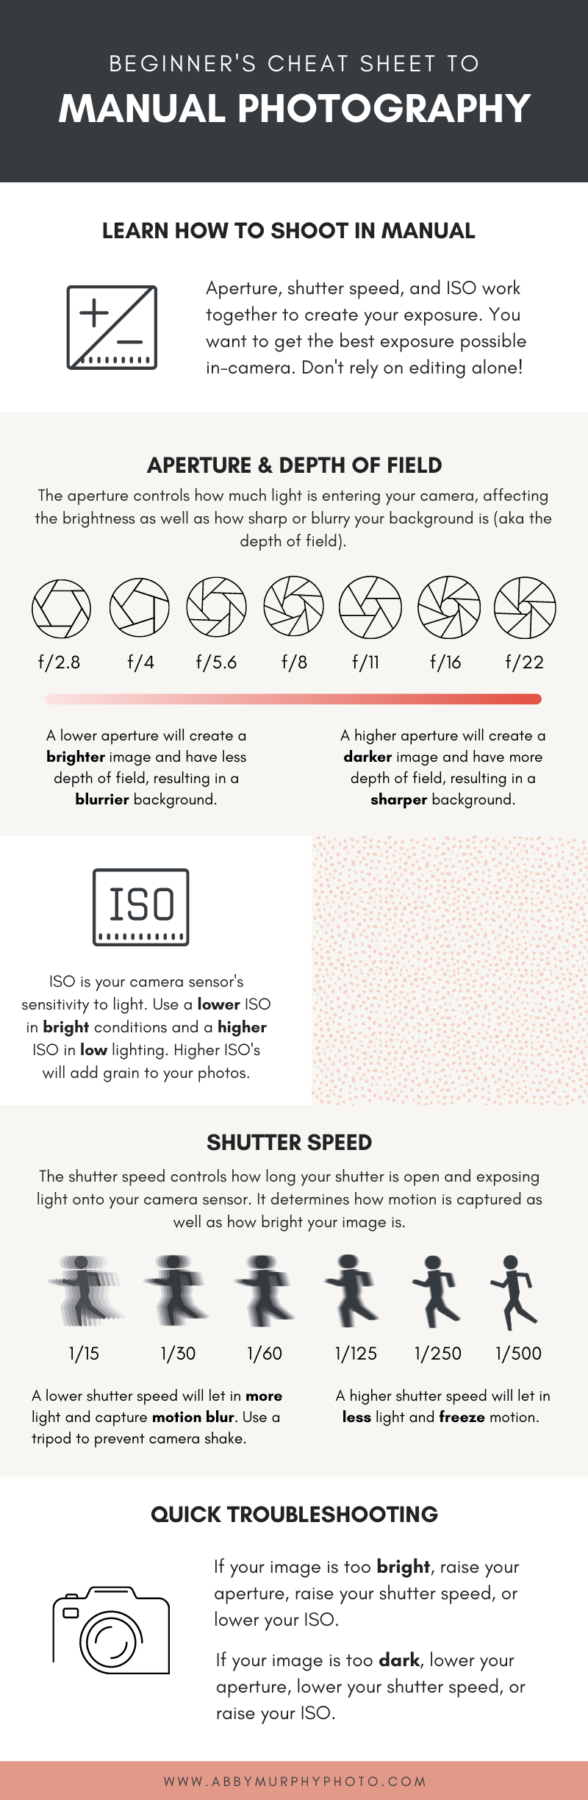 An infographic titled "Beginner's Cheat Sheet to Manual Photography". The infographic includes tips on aperture, shutter speed, and ISO. 